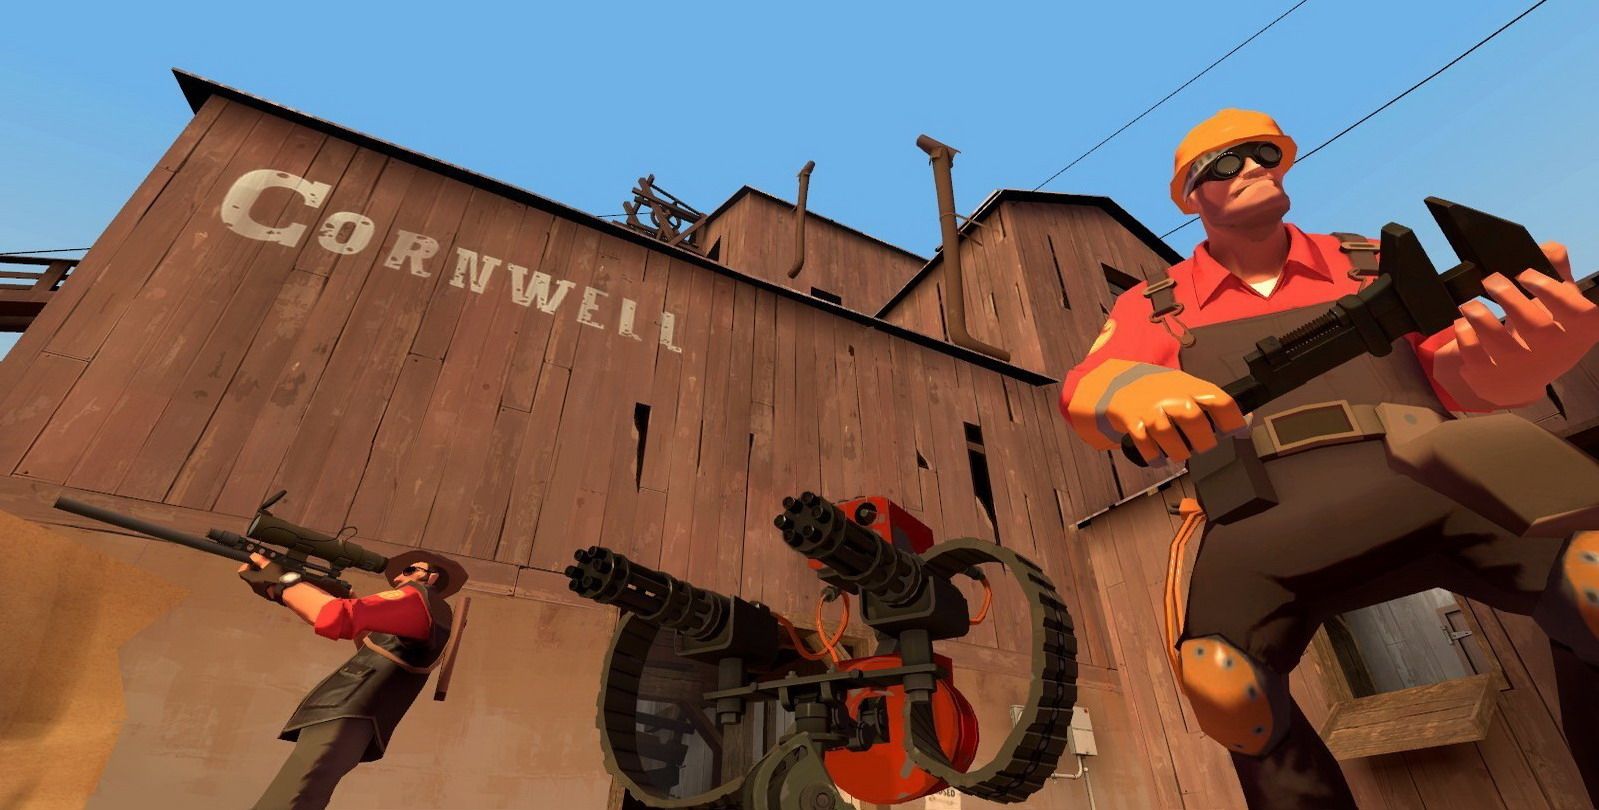 Team fortress 2 image 8